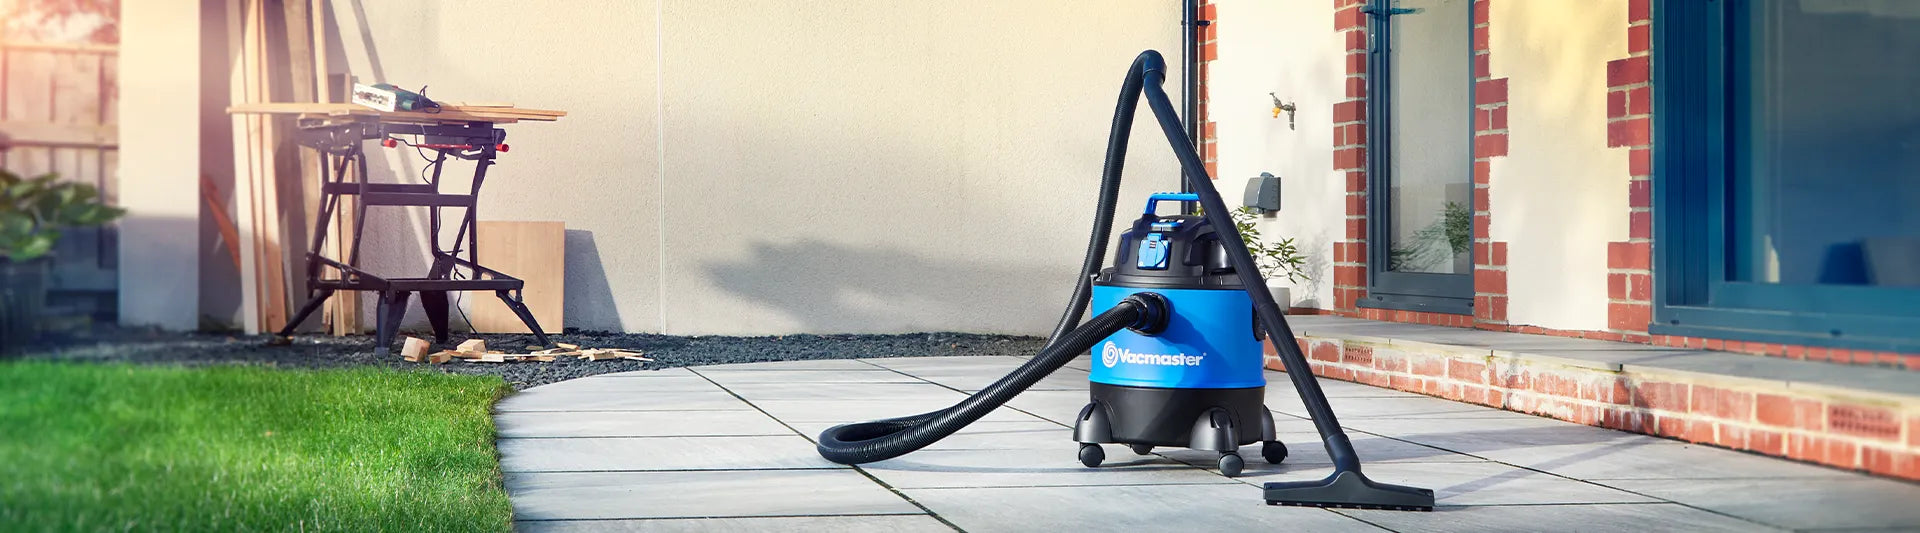 Vacmaster Wet and Dry Vacuum Cleaner